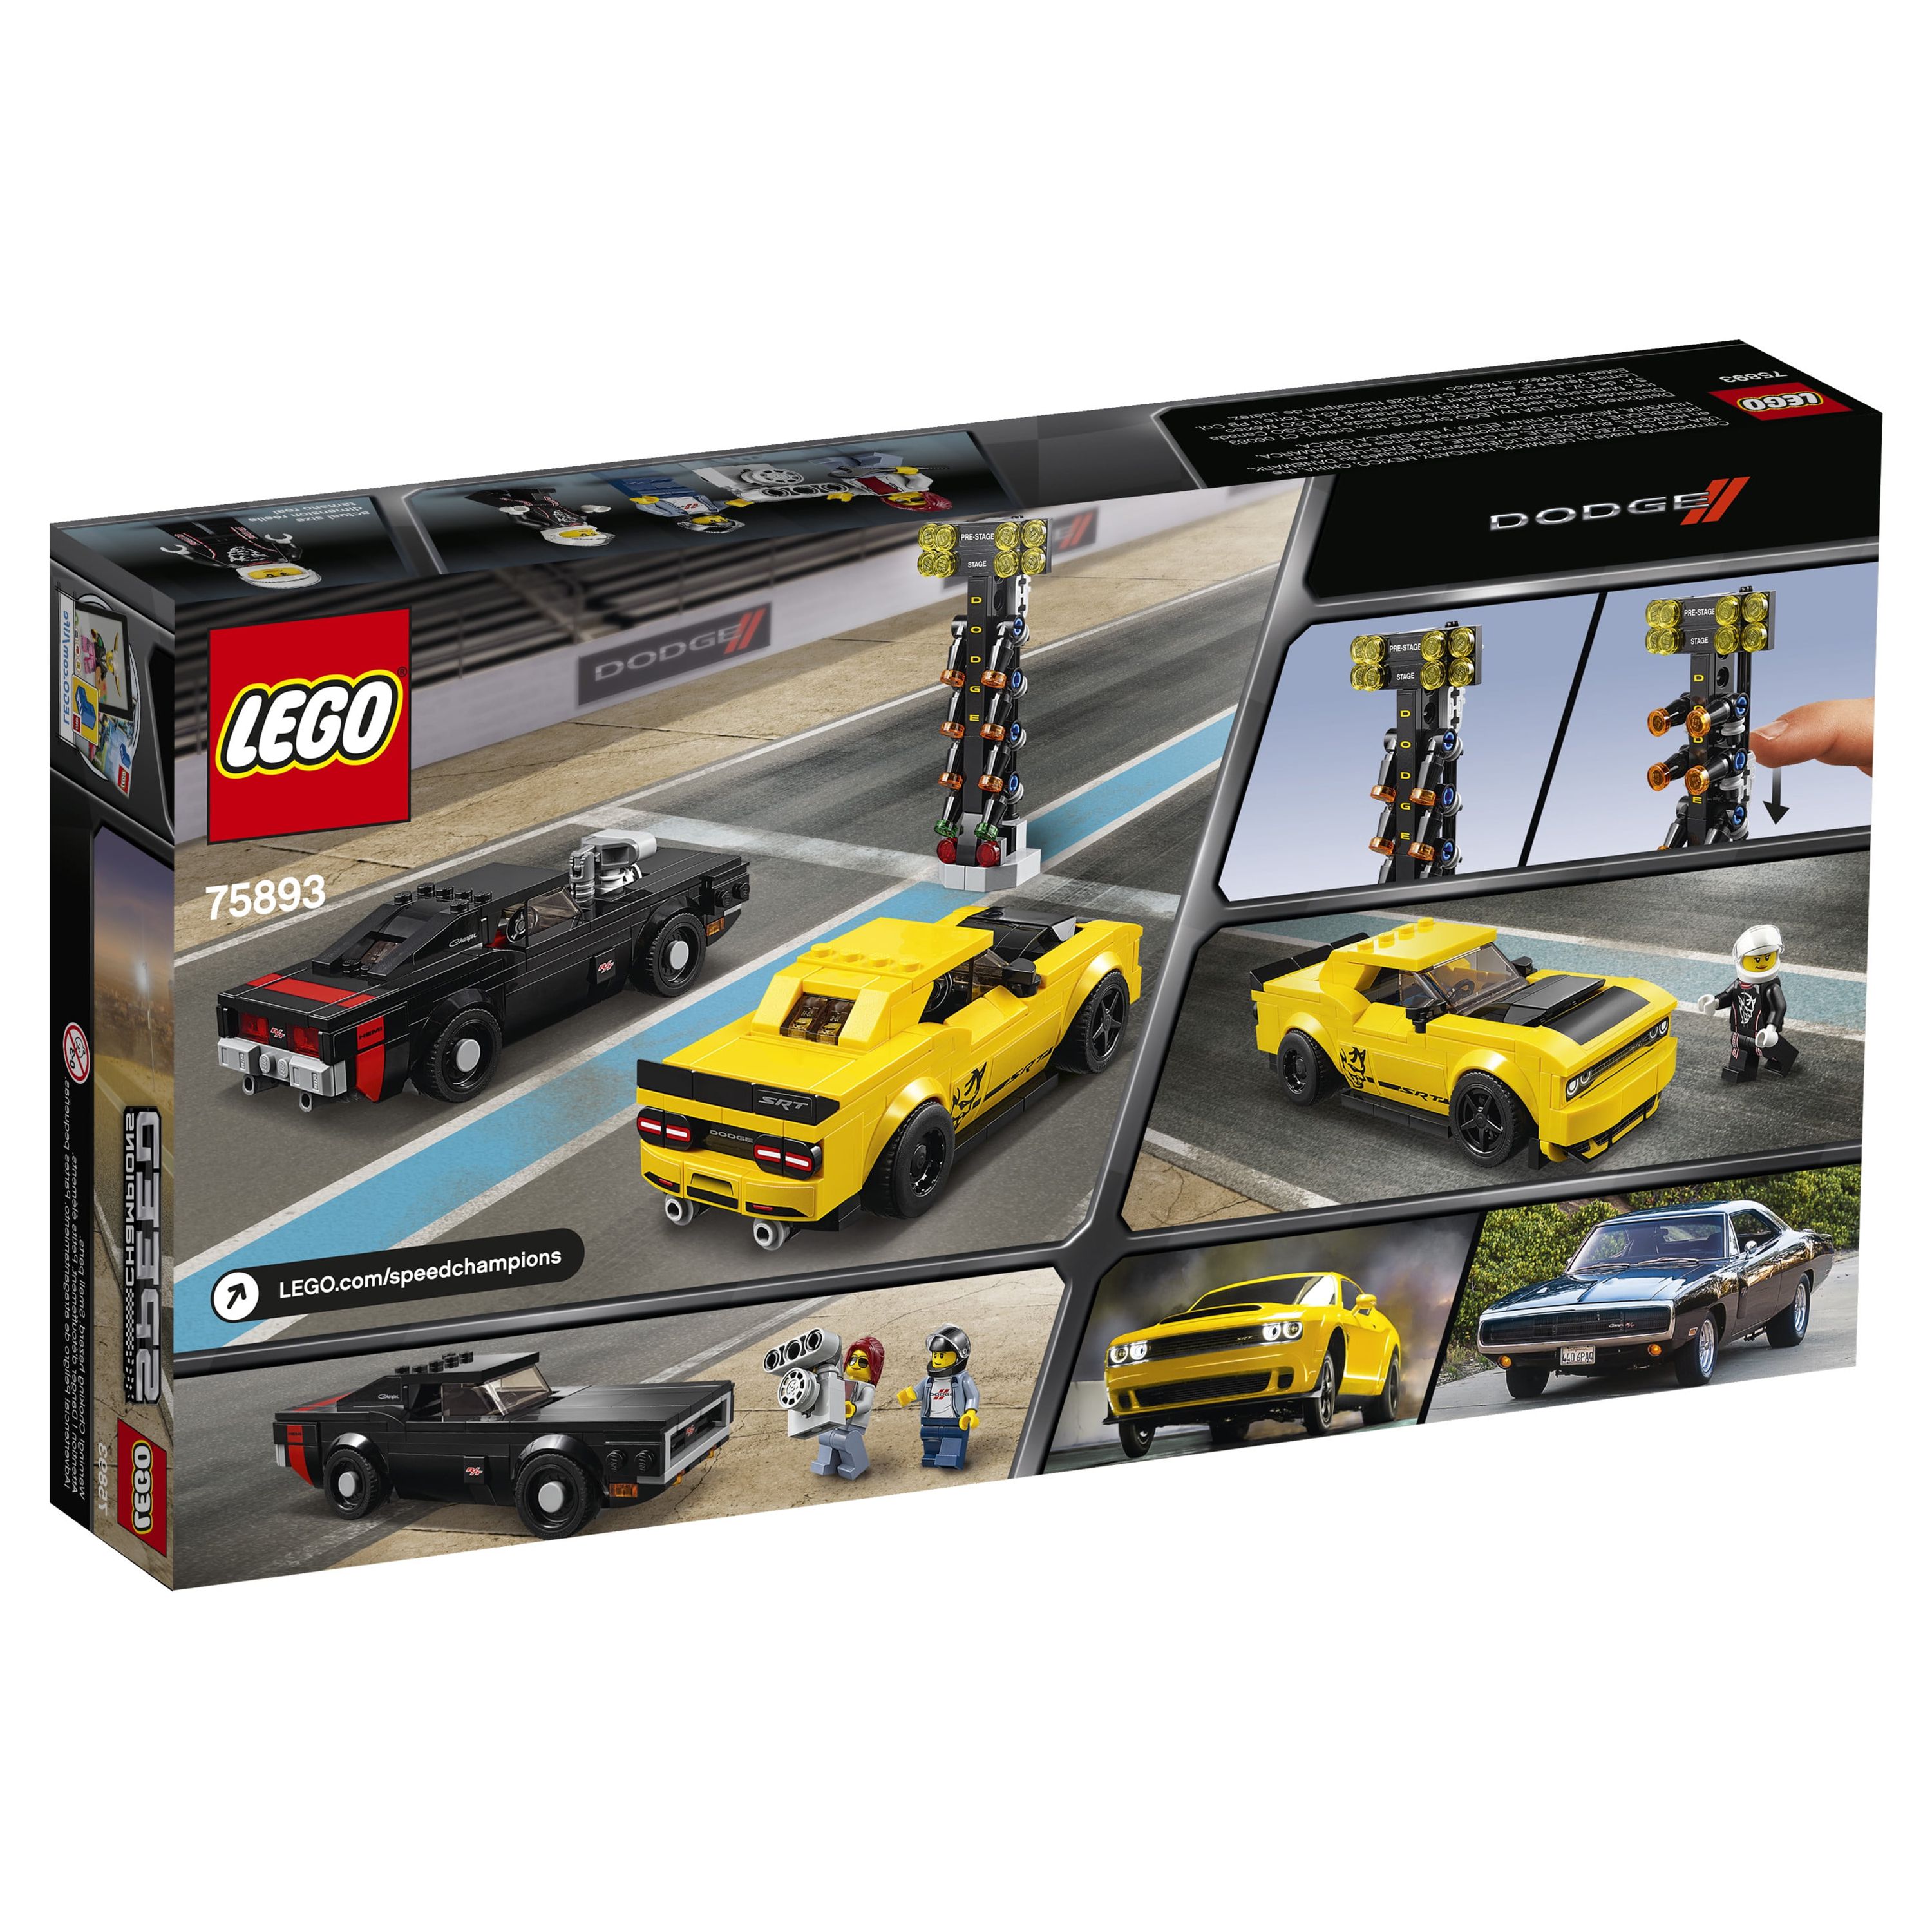 LEGO Speed Champions 2018 Dodge Challenger SRT Demon and 1970 75893 Building Car - image 5 of 5